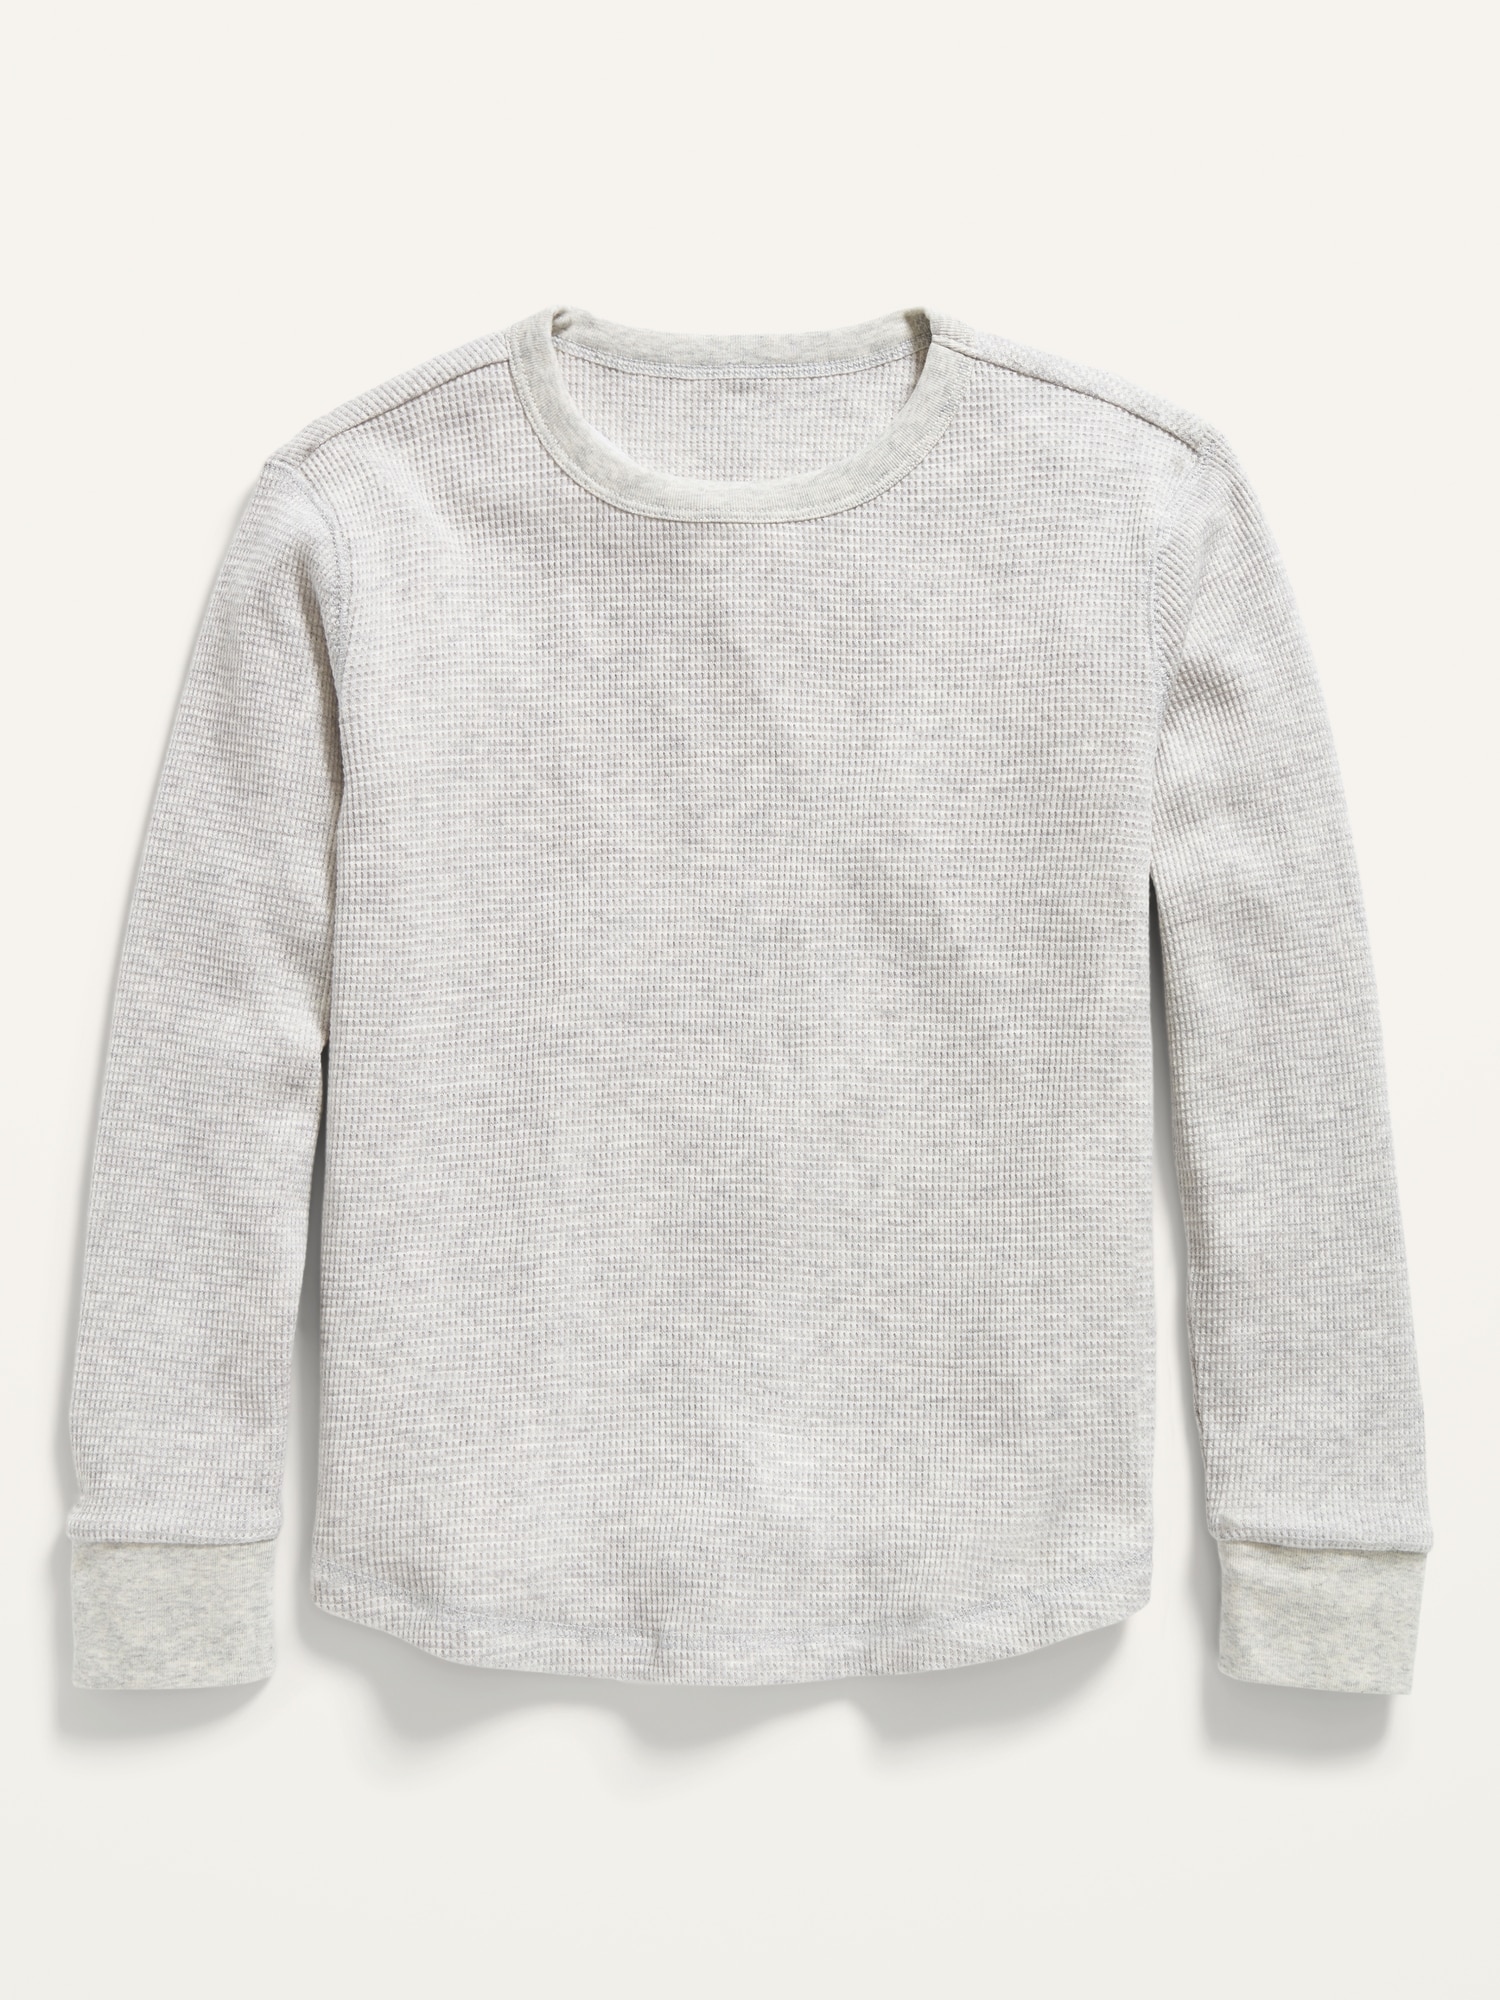 Long-Sleeve Thermal T-Shirt For Boys | Old Navy